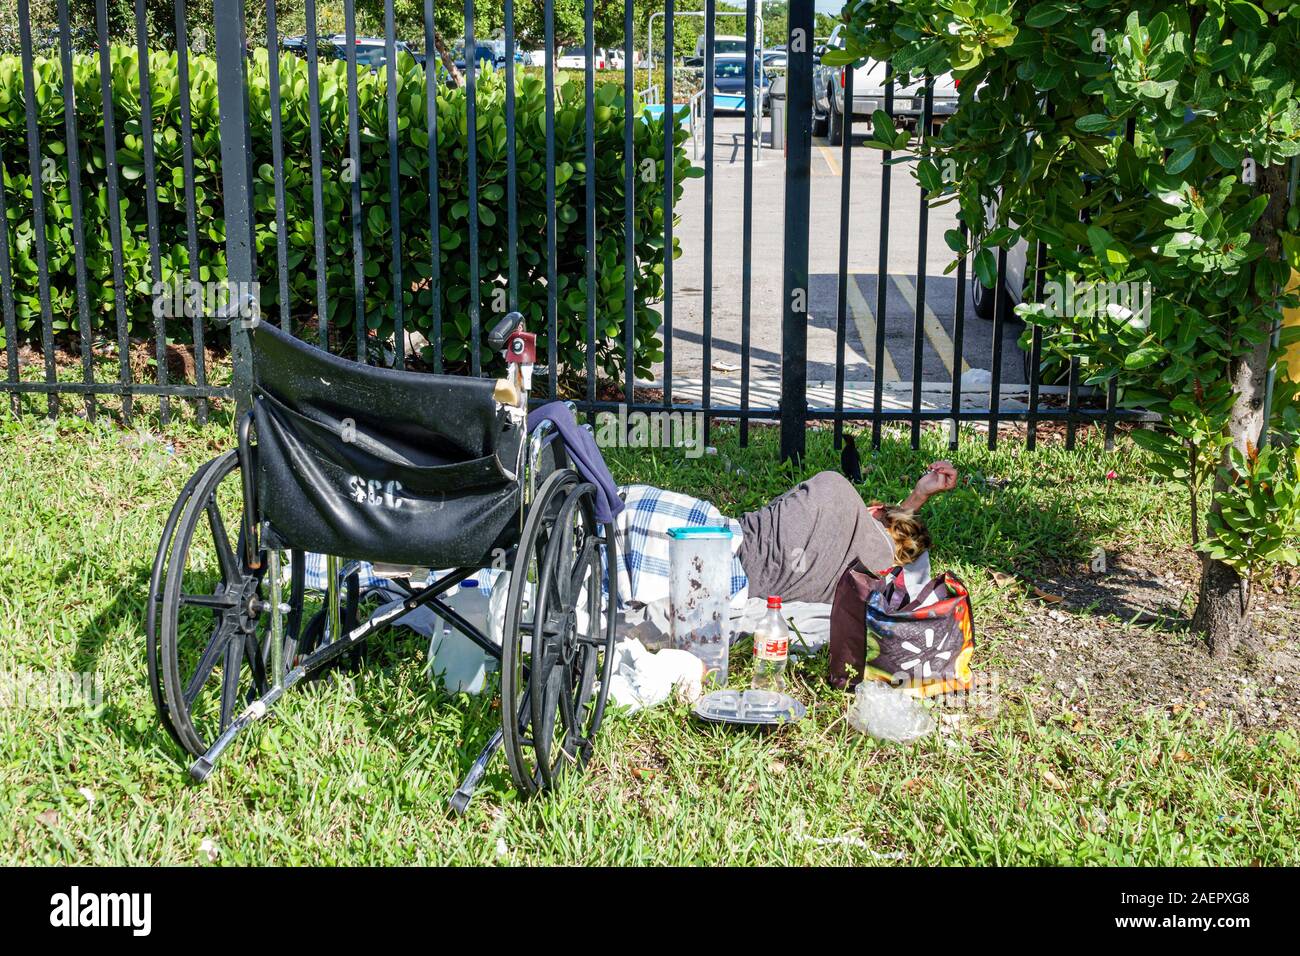 Miami Florida,Hialeah,parking lot,man,homeless,disabled,wheelchair,sleeping on grass,empty plastic food containers,FL191025013 Stock Photo